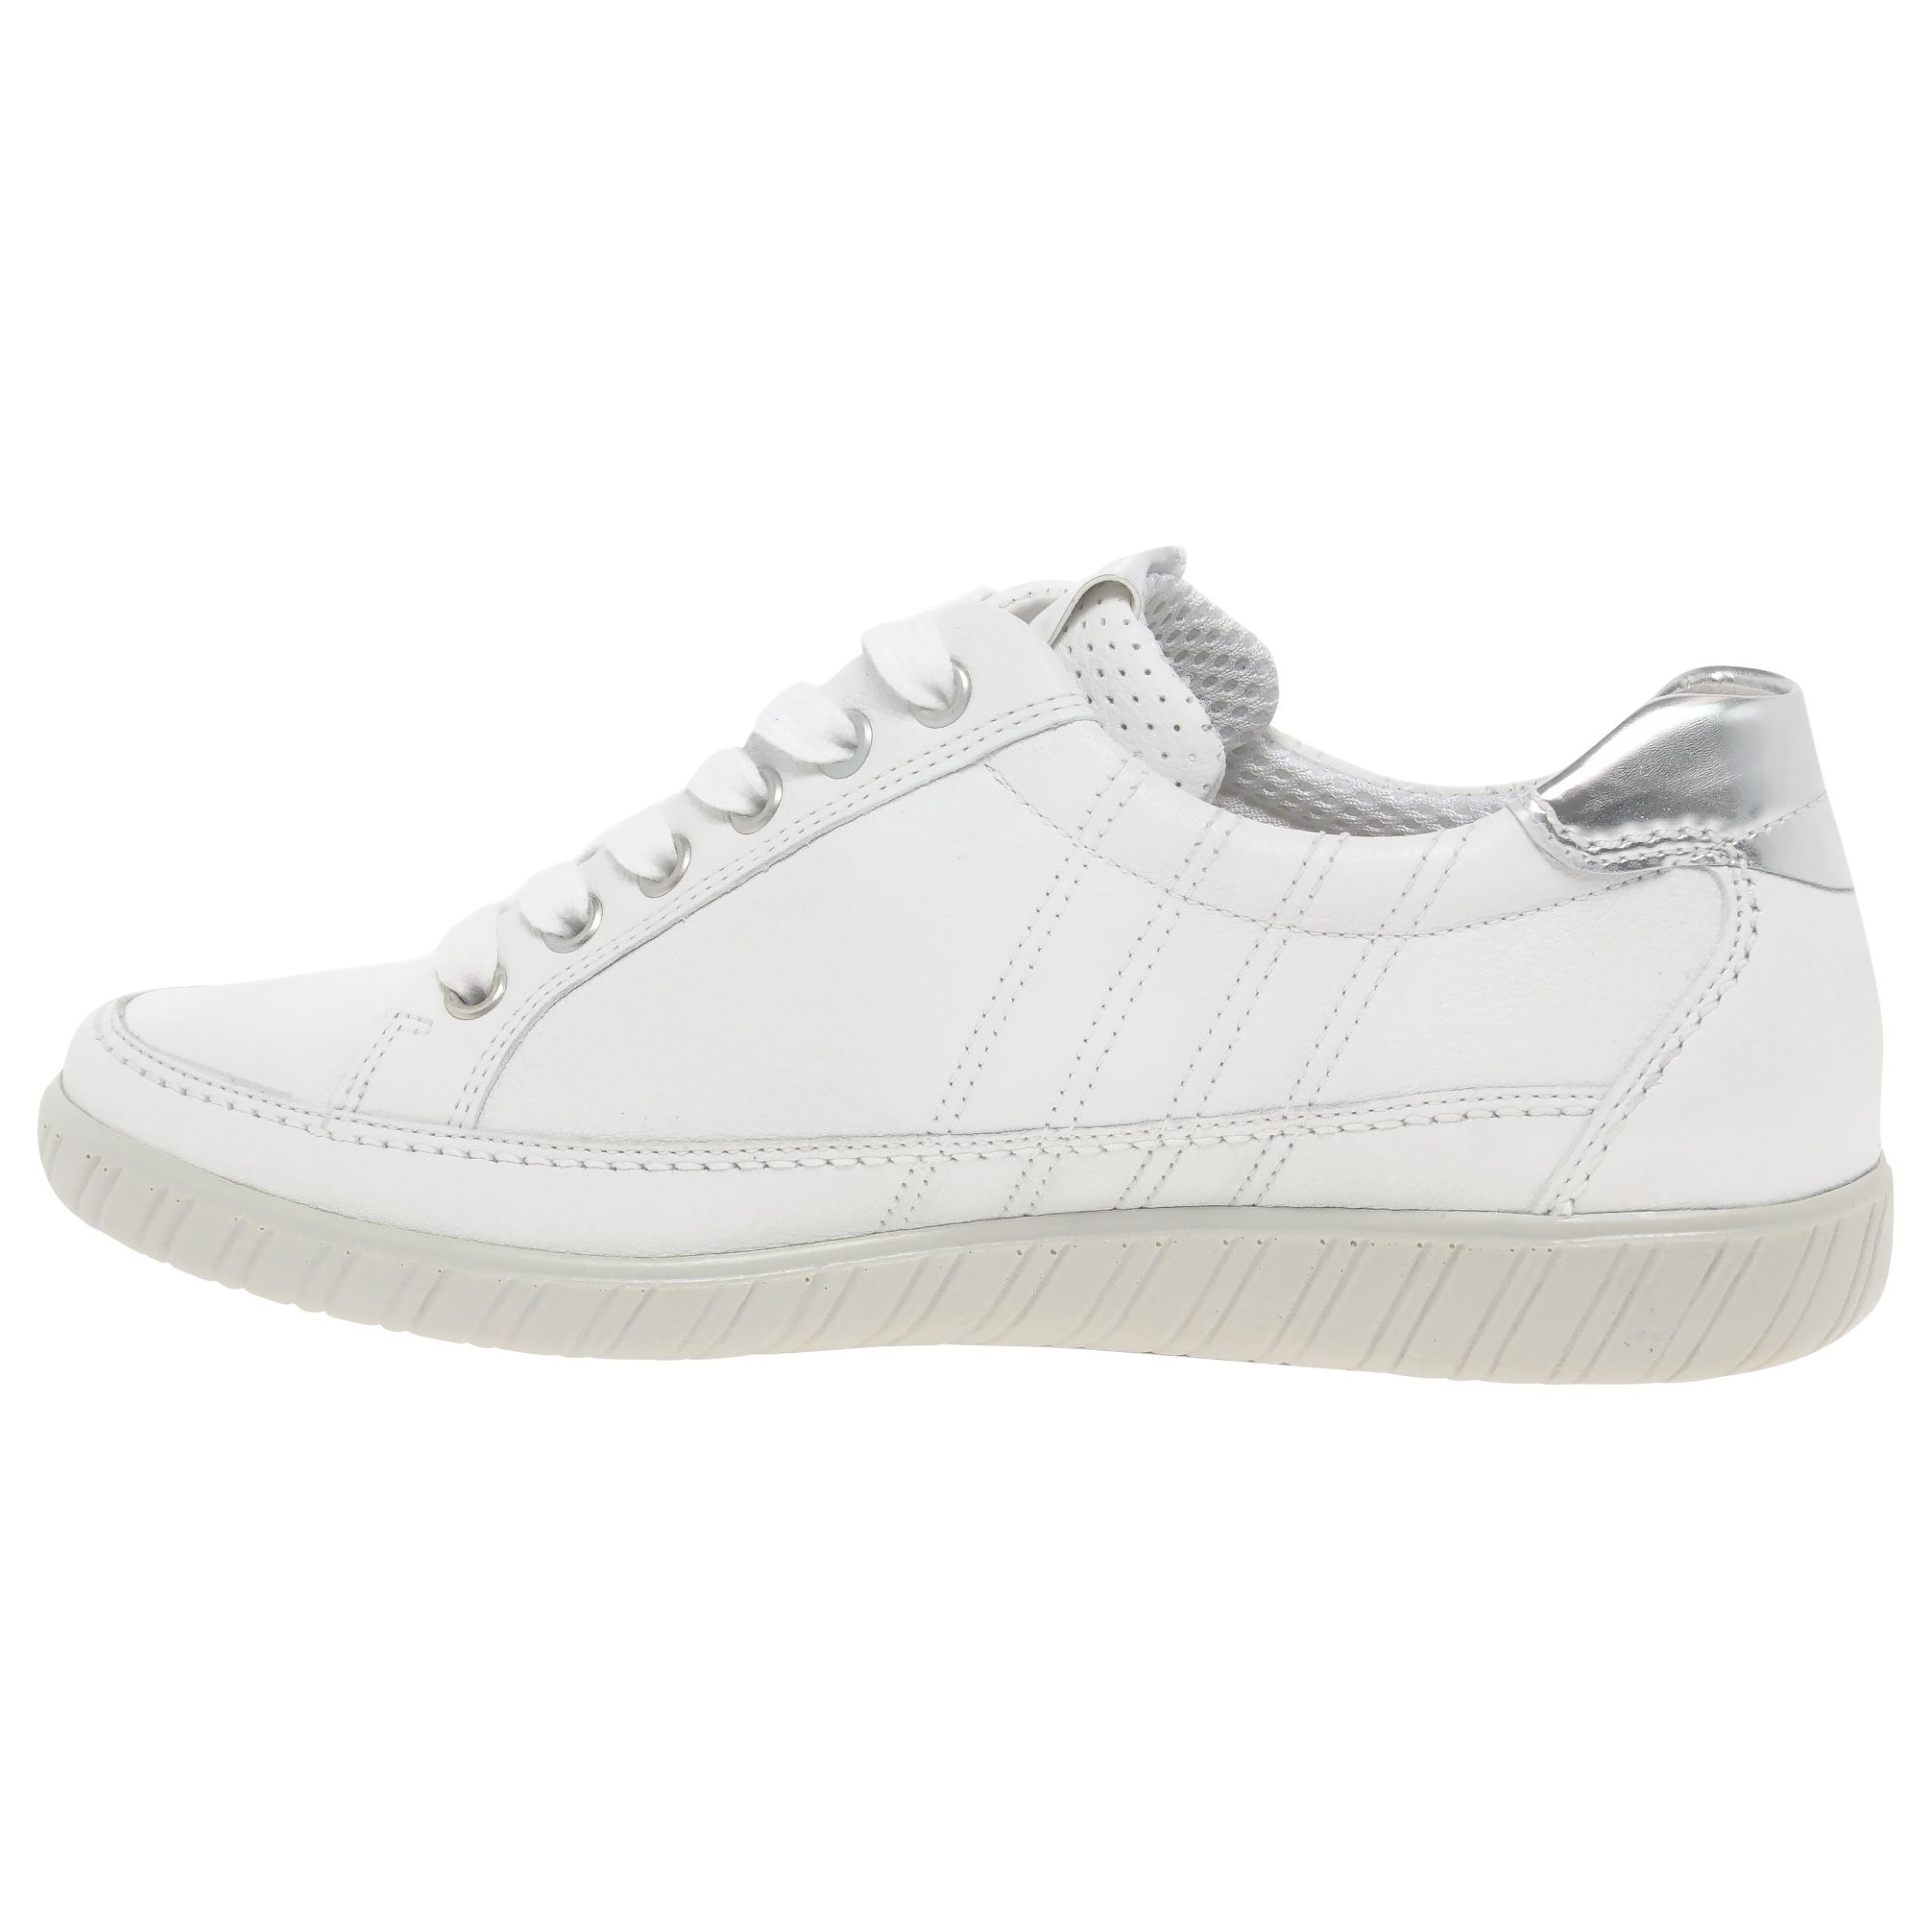 Gabor Amulet Wide Fit Lace Up Trainers, White Leather